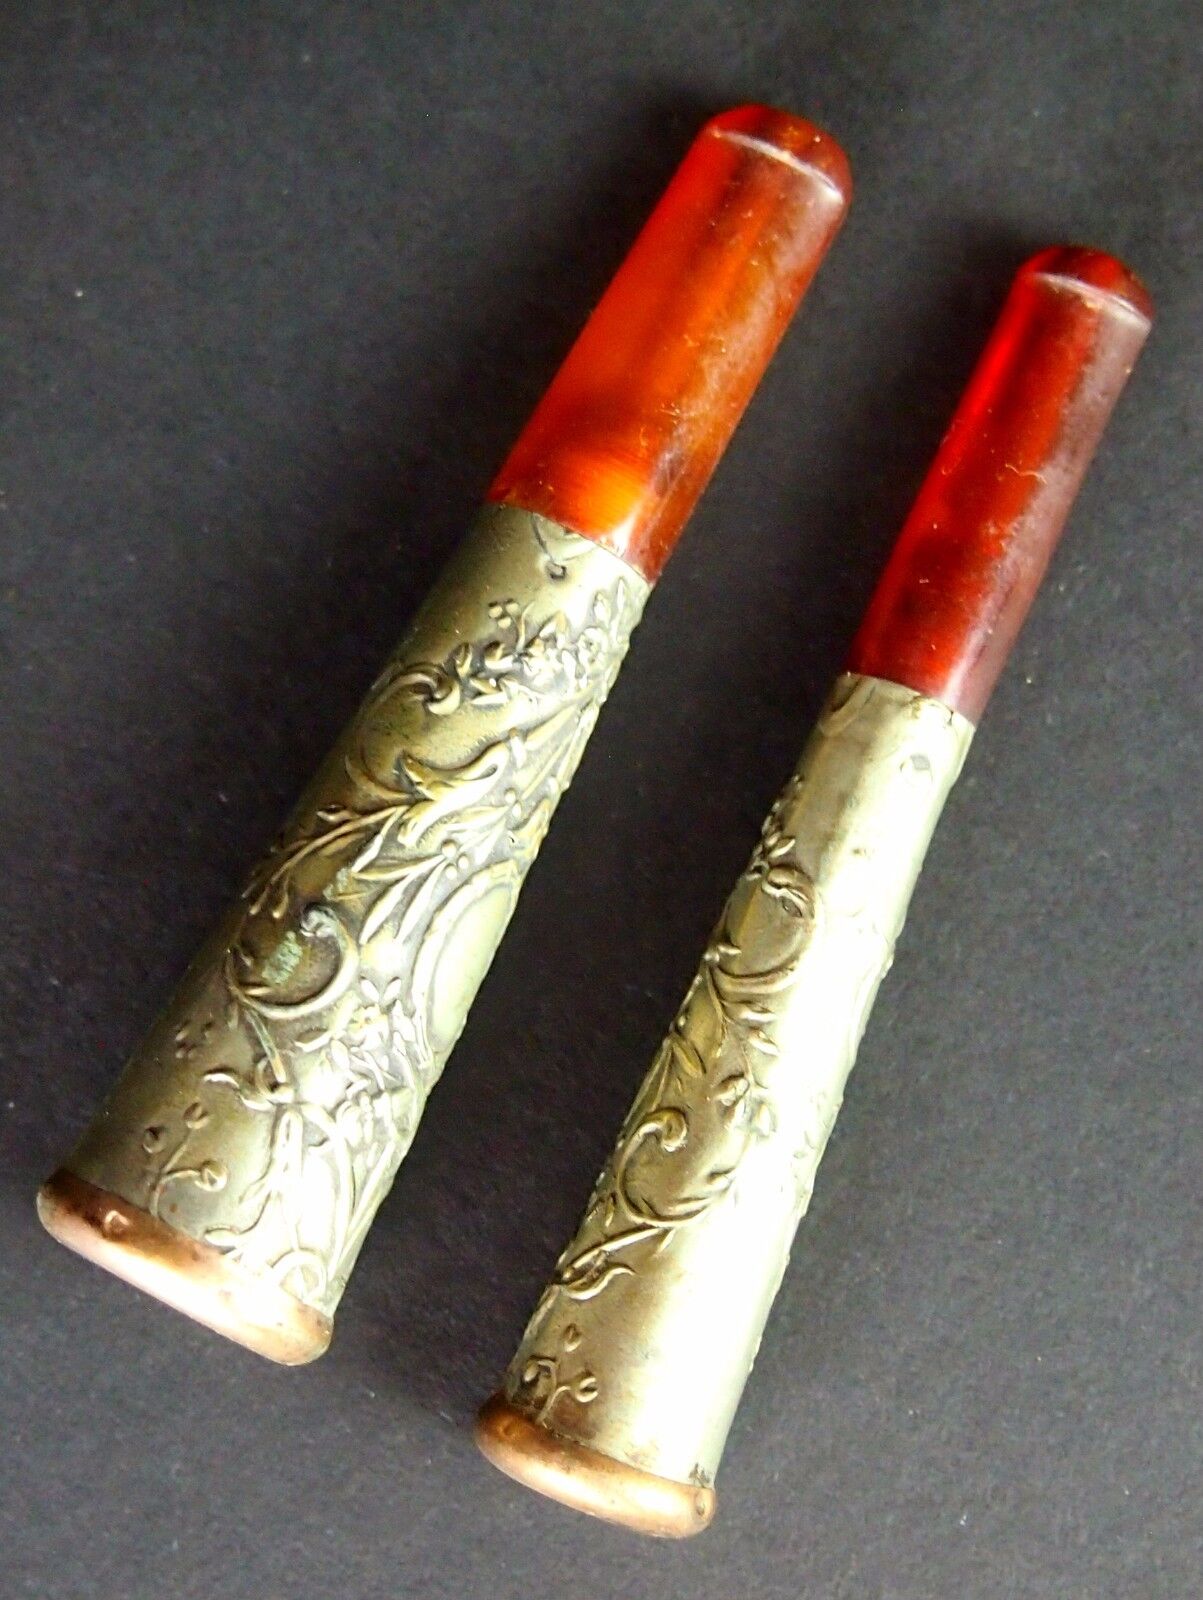 2 CIGARETTE MOUTHPIECE. AMBER. SILVER PLATED METAL. HAND CHISELLED. SPAIN. XIX.